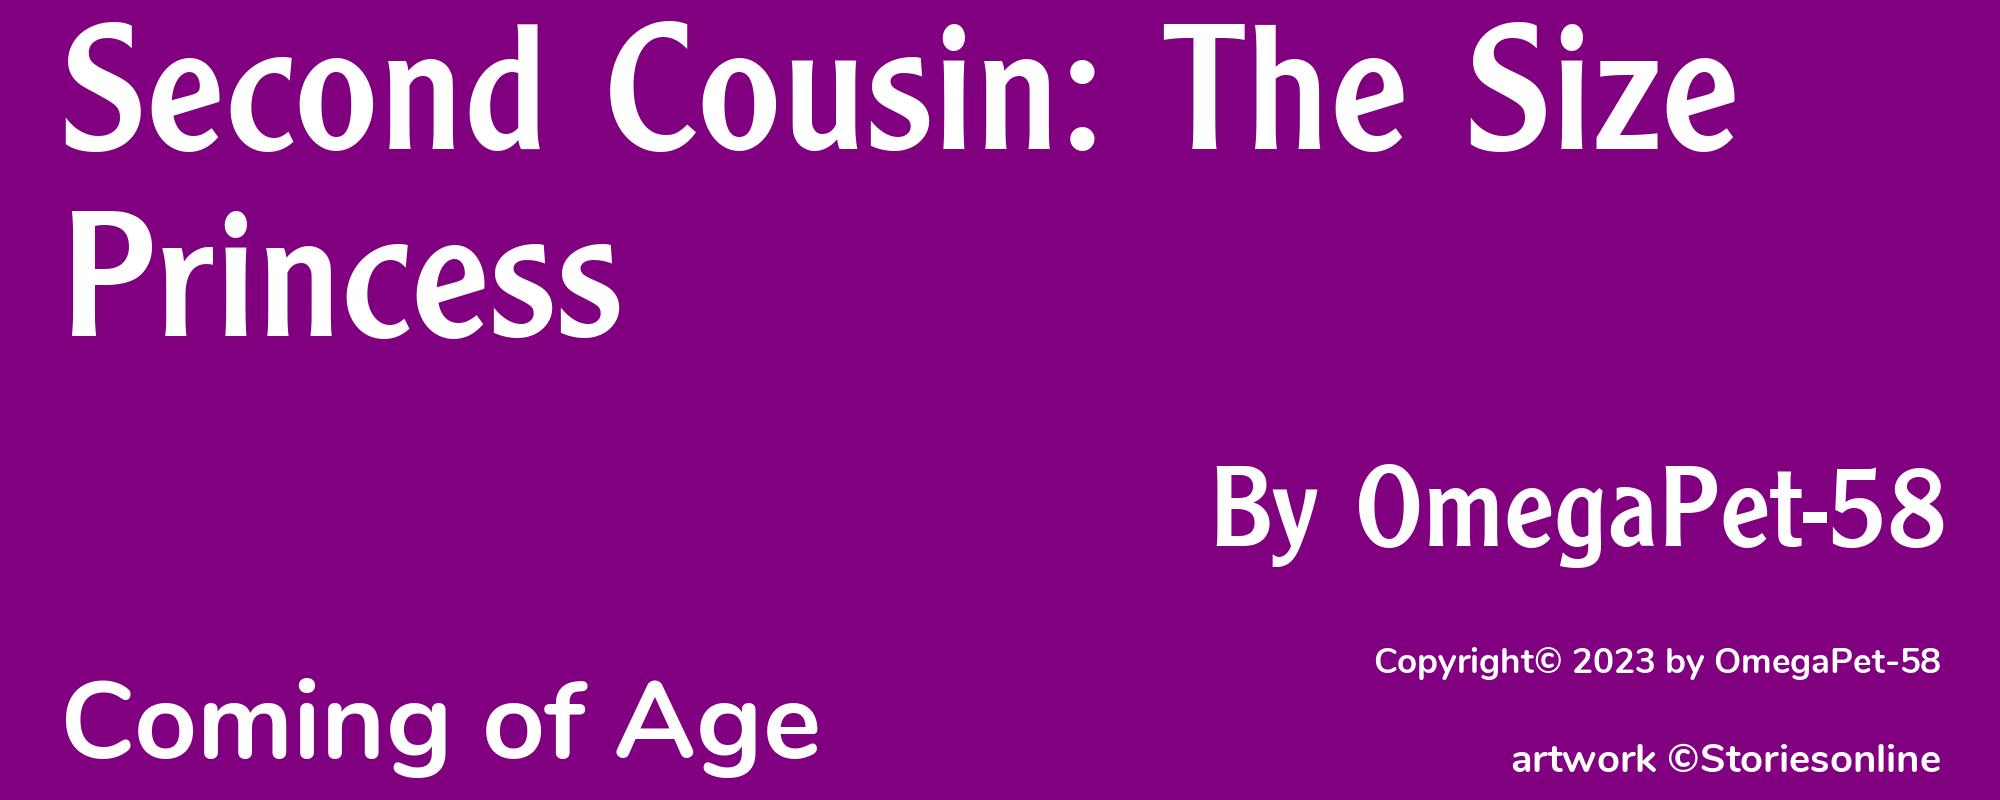 Second Cousin: The Size Princess - Cover